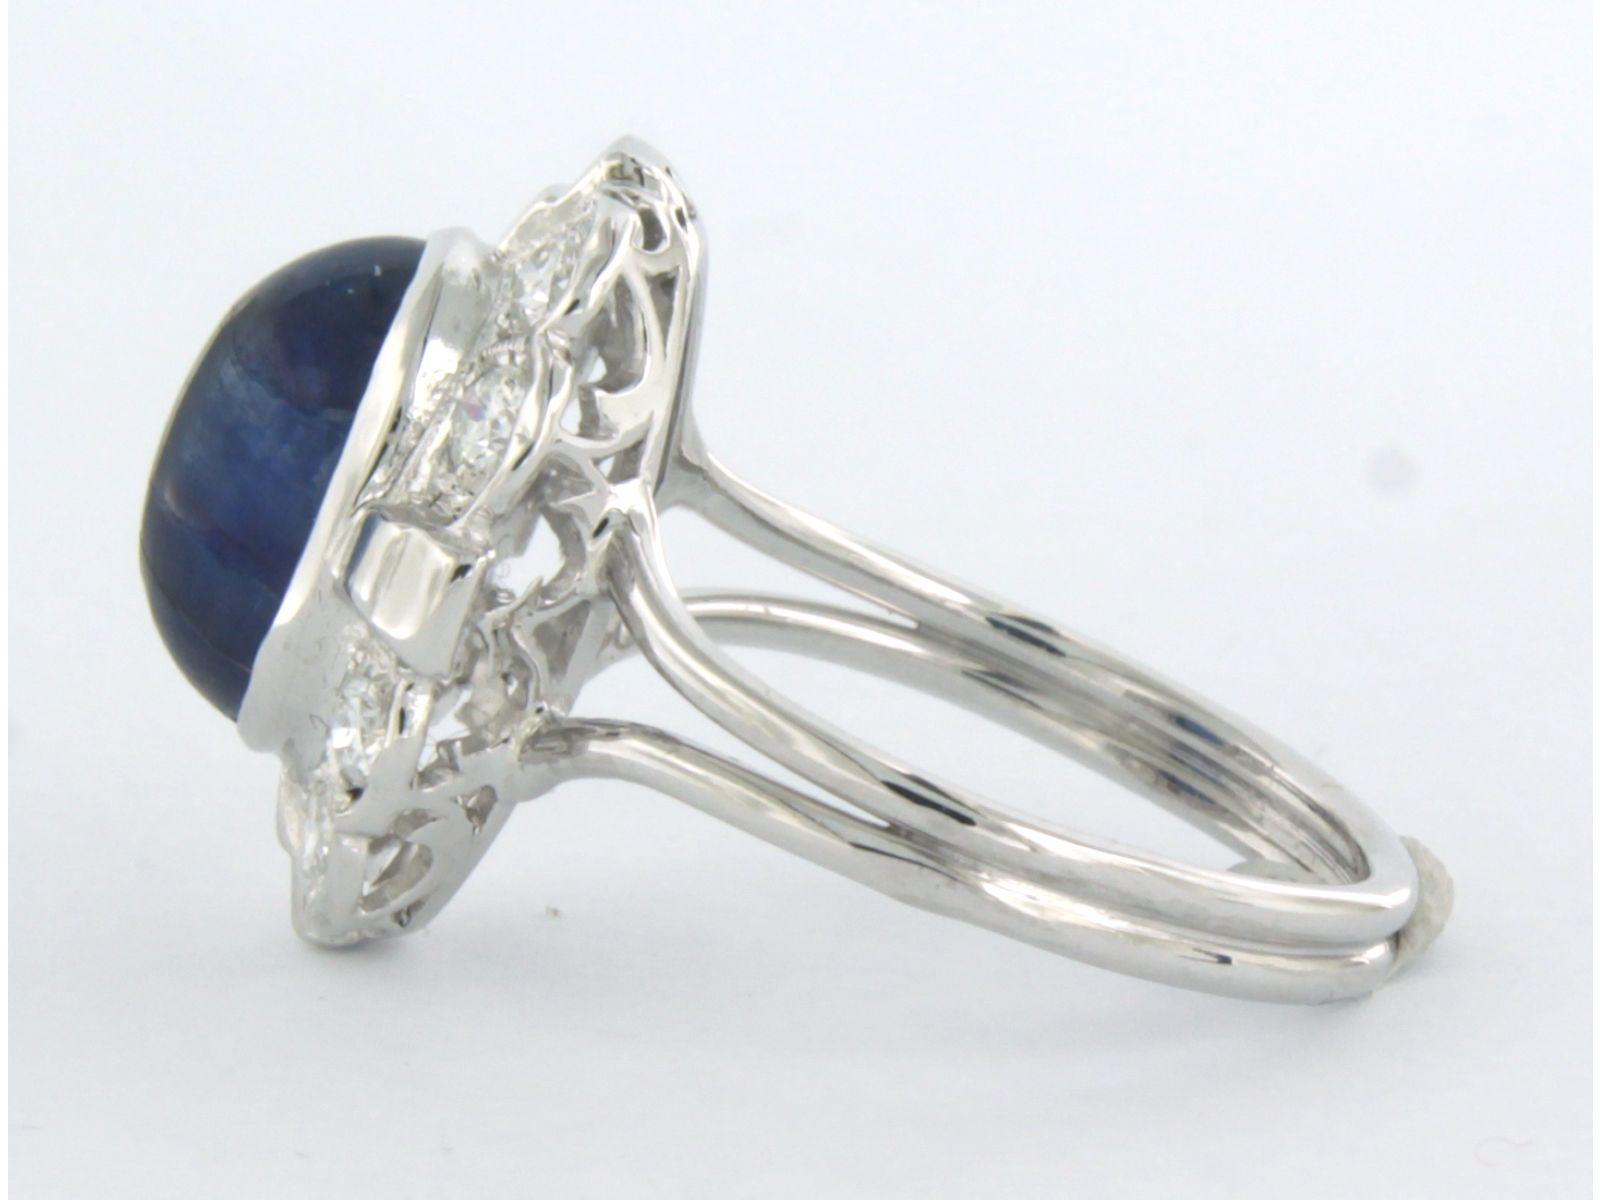 Ring with sapphire and diamonds 14k white gold For Sale 1